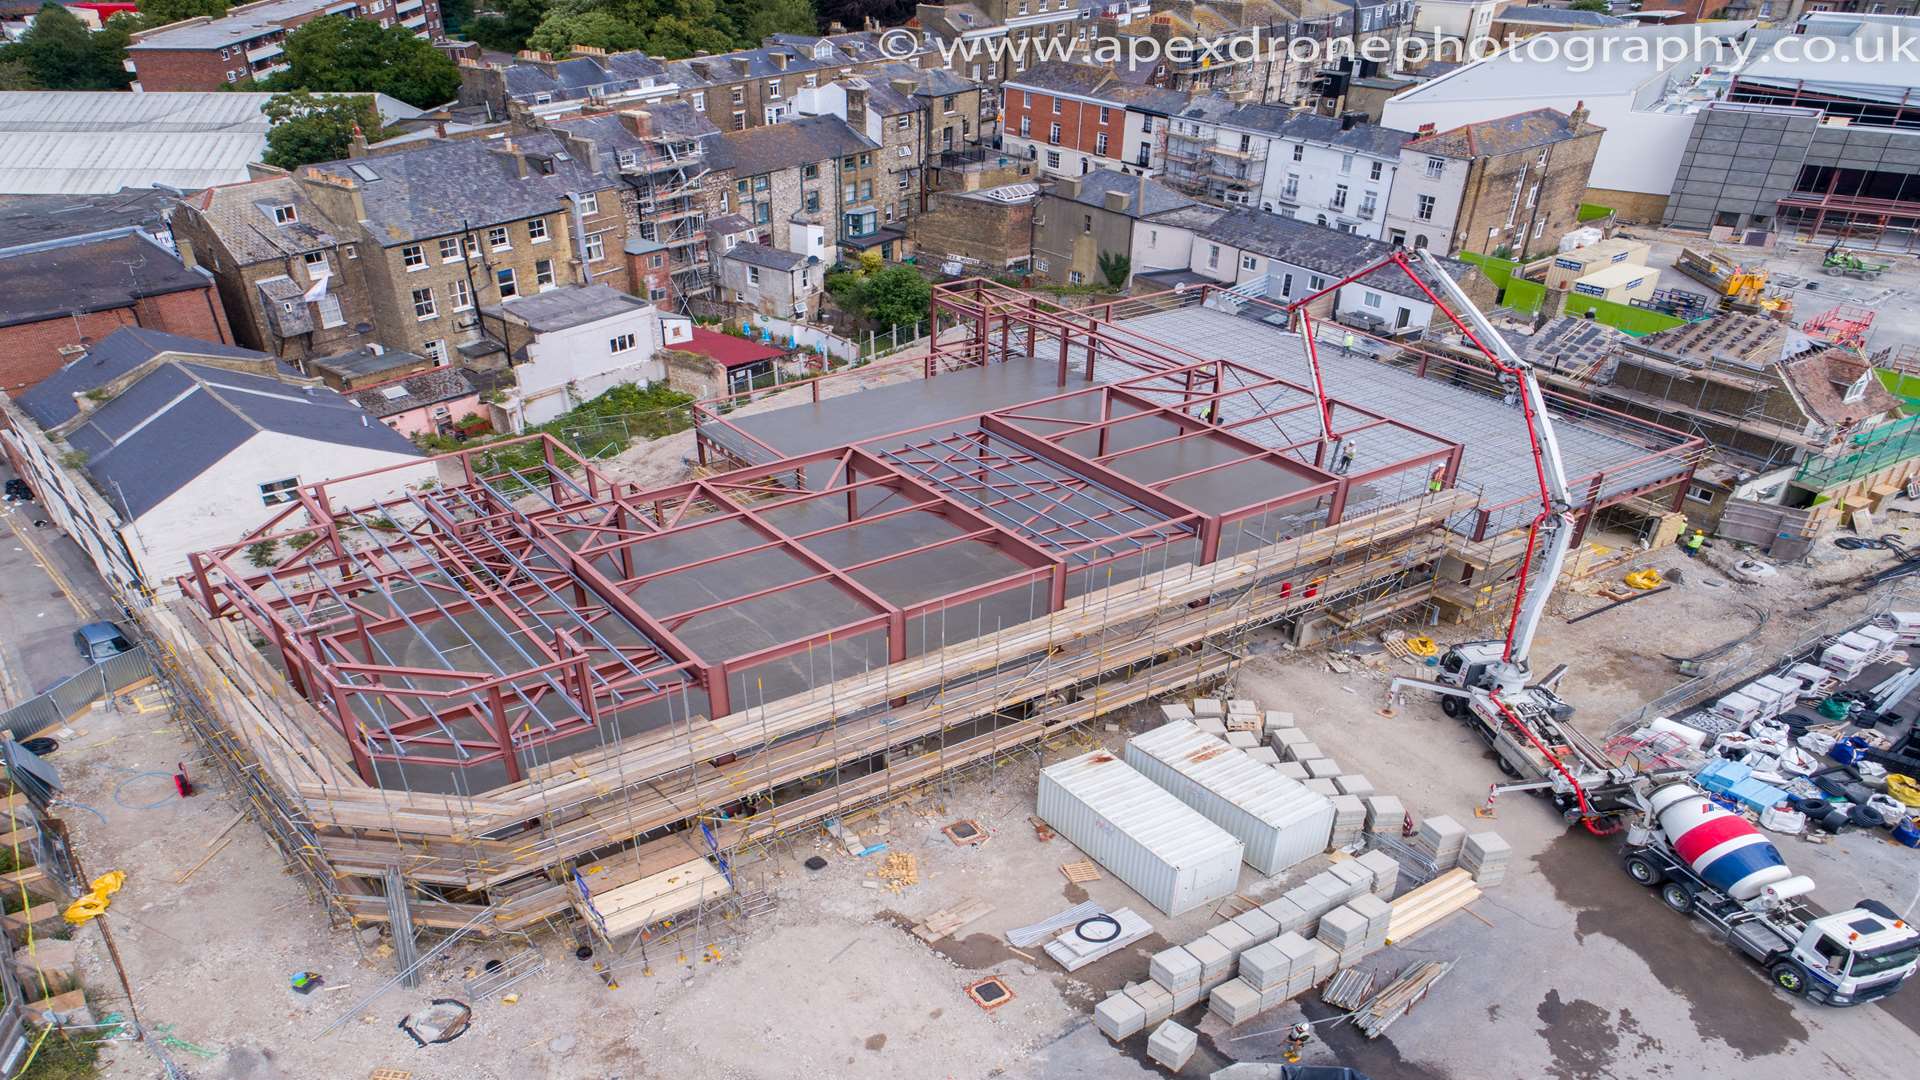 The St James' development last month. Picture courtesy of Apex Drone Photography